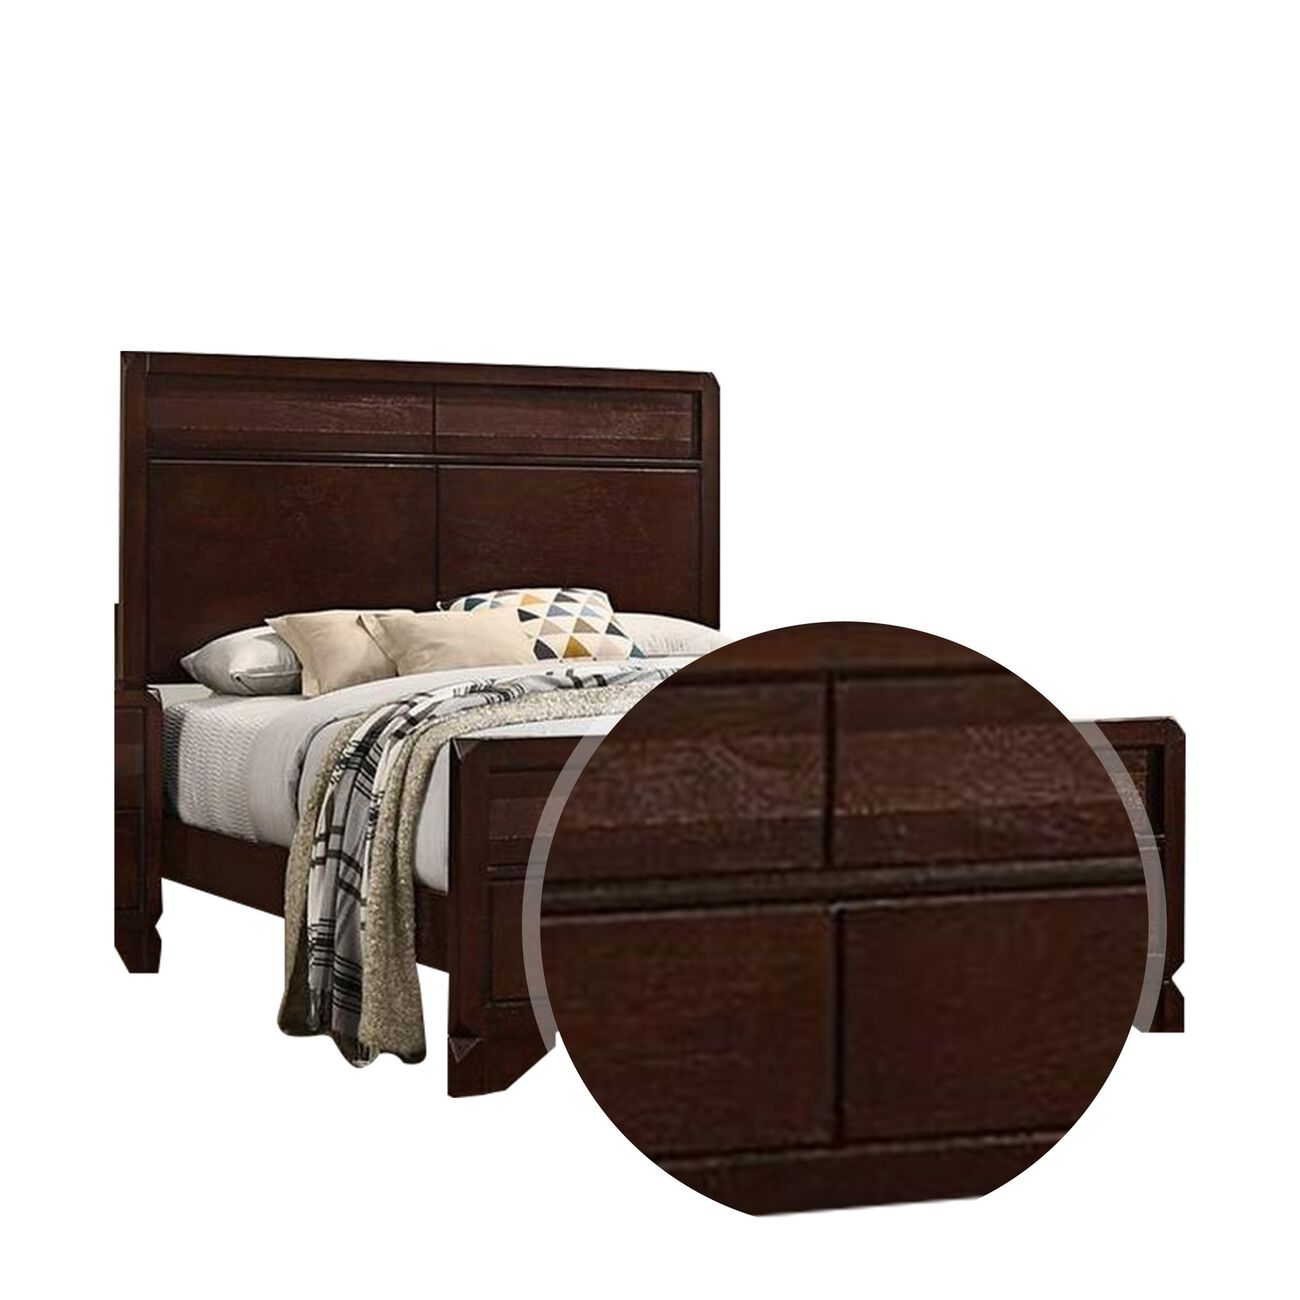 Panel Design Wooden King Headboard and Footboard with Molded Detail, Brown